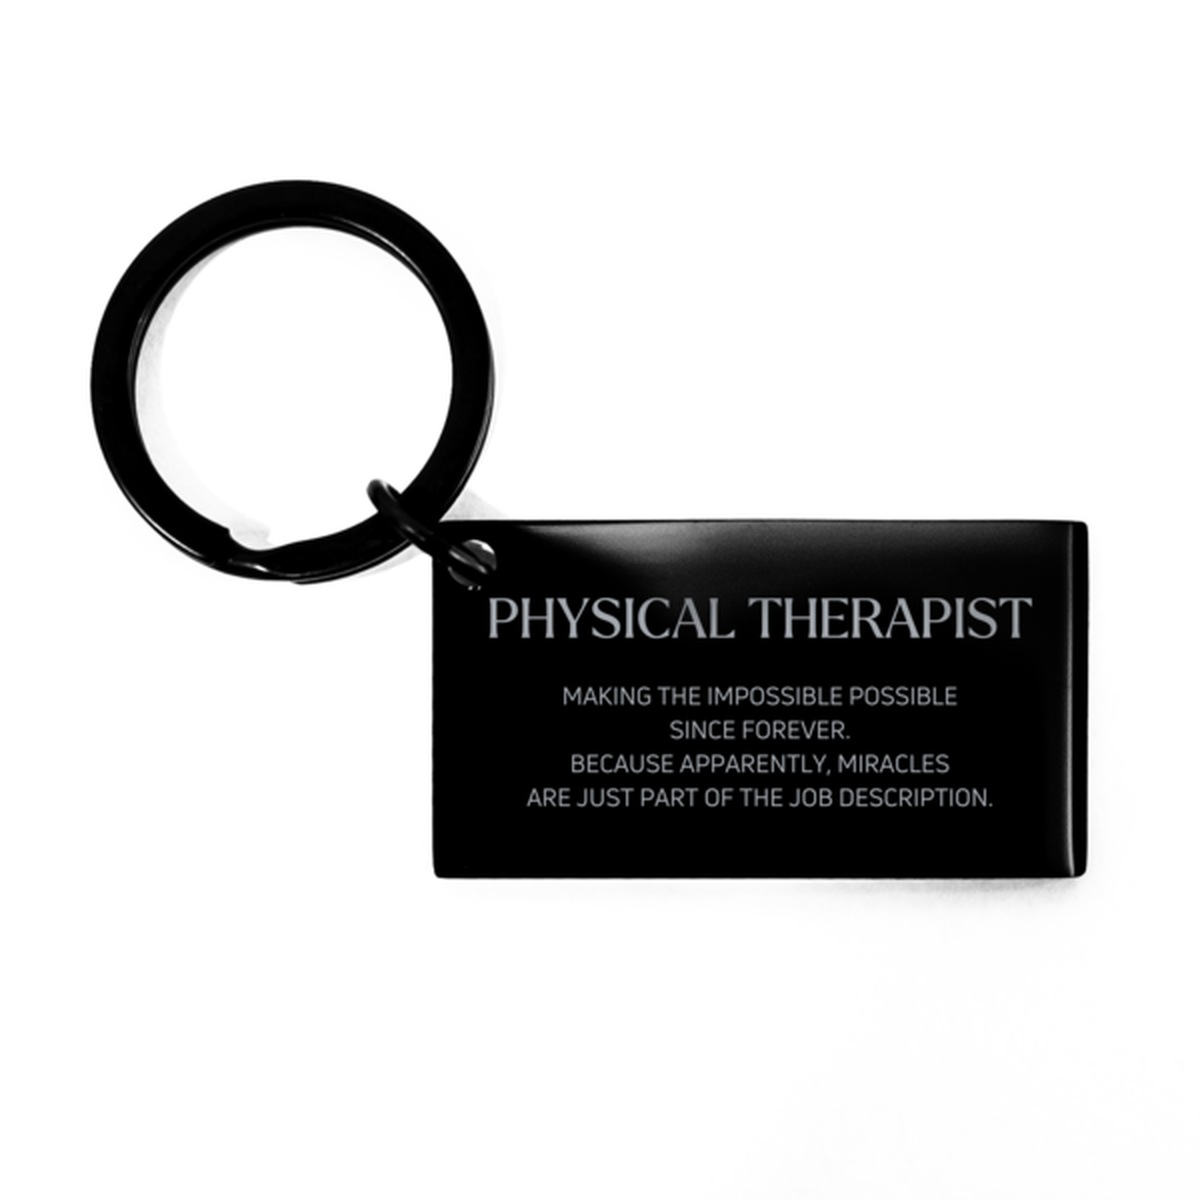 Funny Physical Therapist Gifts, Miracles are just part of the job description, Inspirational Birthday Keychain For Physical Therapist, Men, Women, Coworkers, Friends, Boss